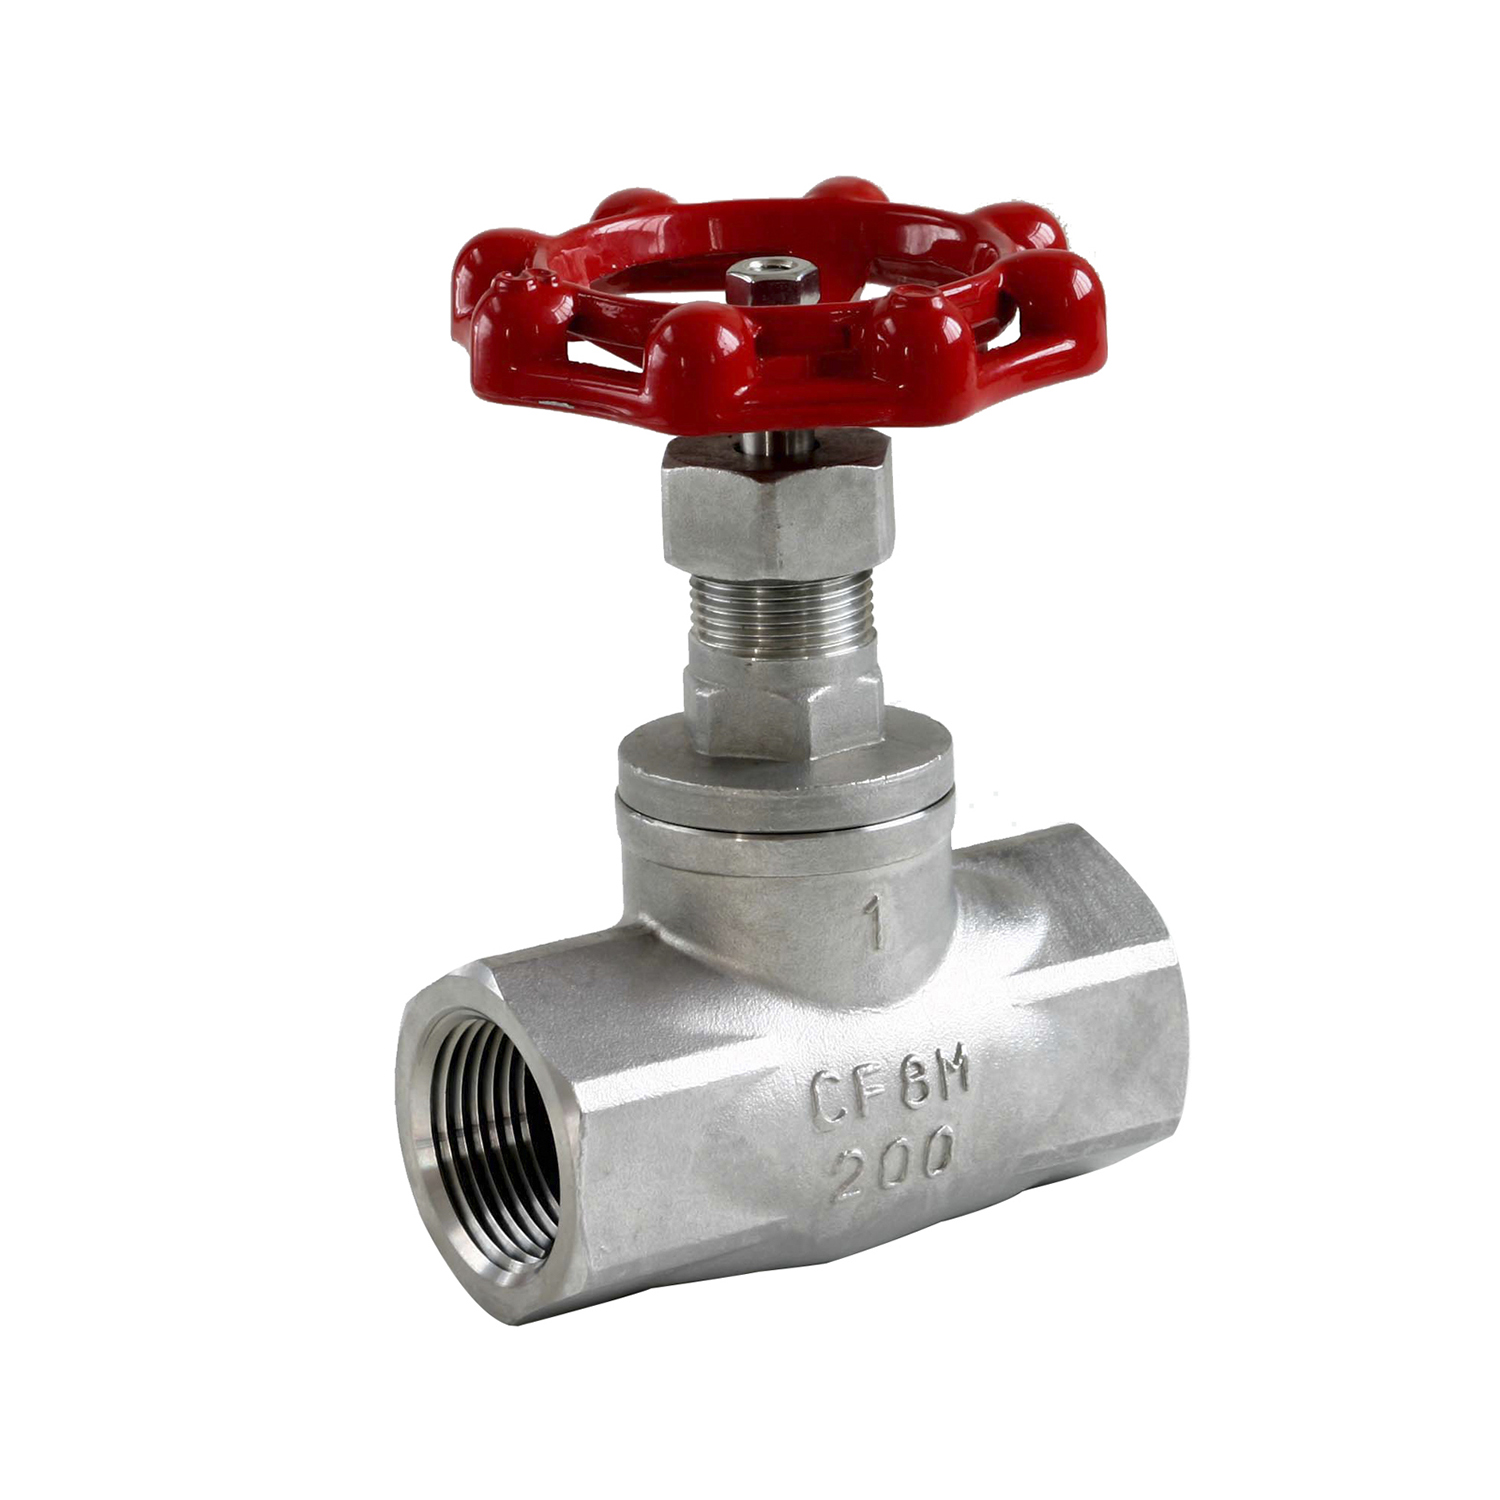 2'' 316 stainless steel ball valve with Full-port 1000PSI